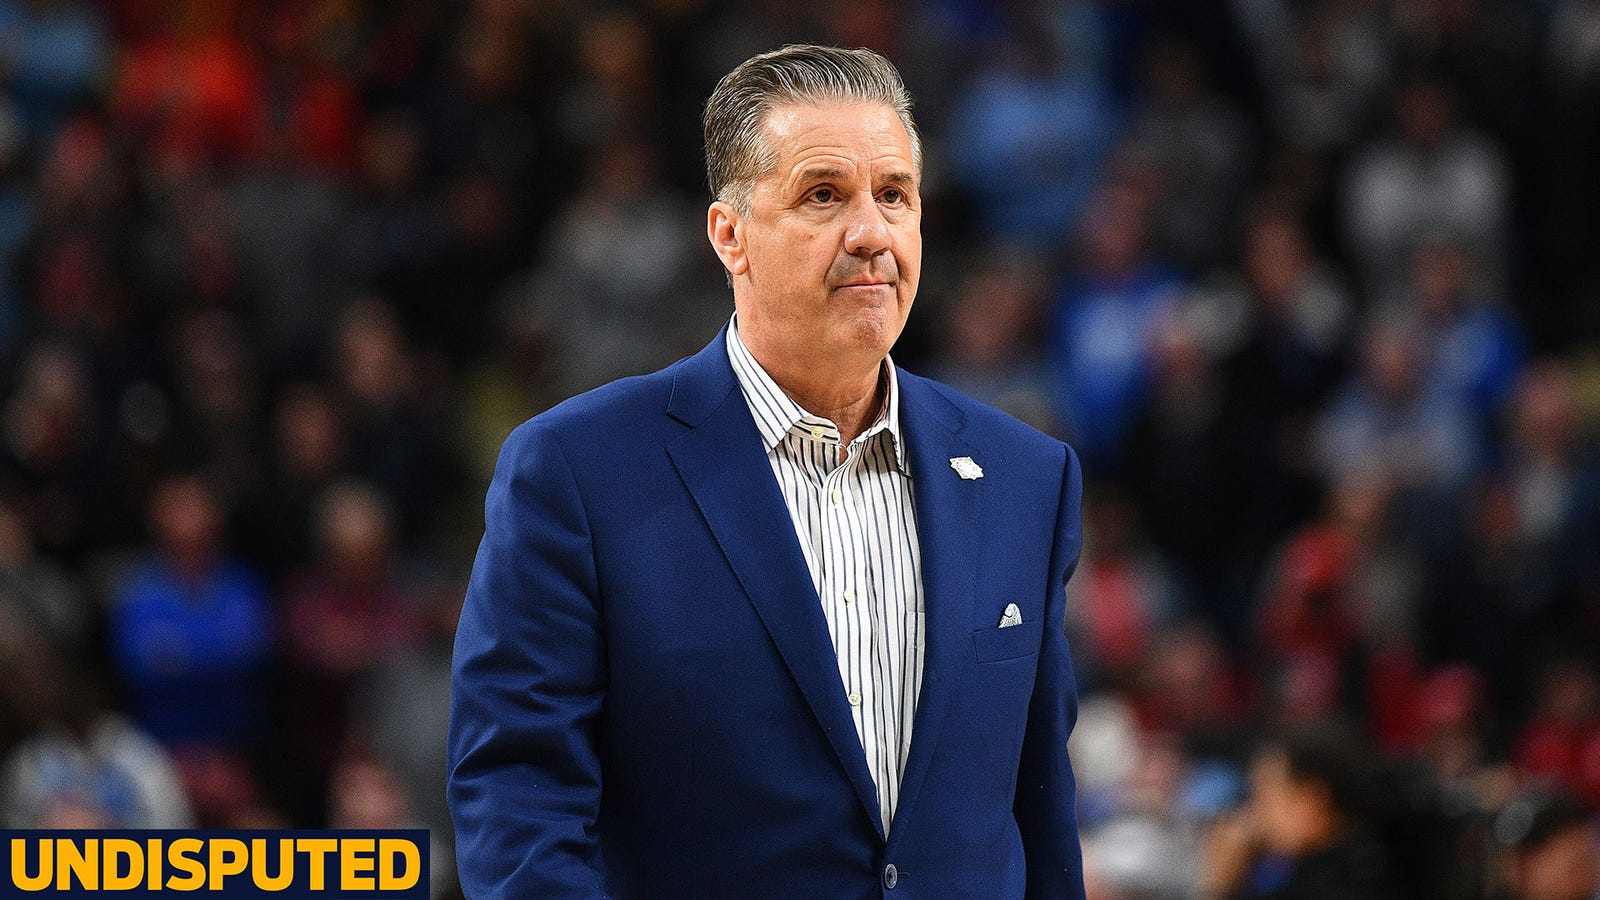 Kentucky ousted in 1st Rd of NCAA Tournament: time to move on from Calipari? 